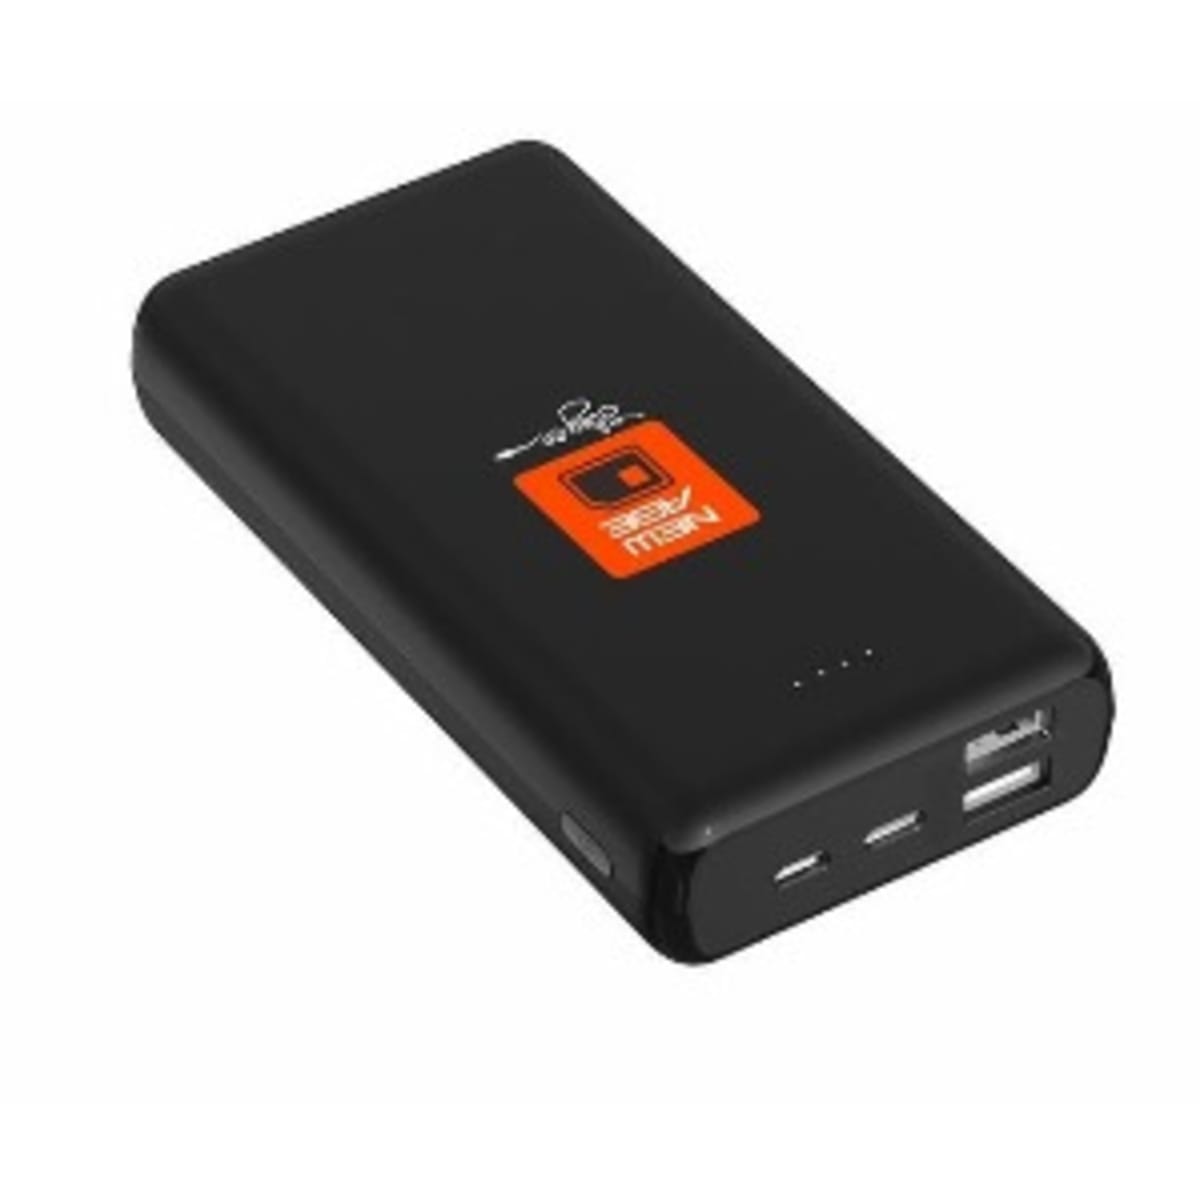 New Age Ck20 Power Bank With 3a Type-c Input & Output Port - 22500mAh